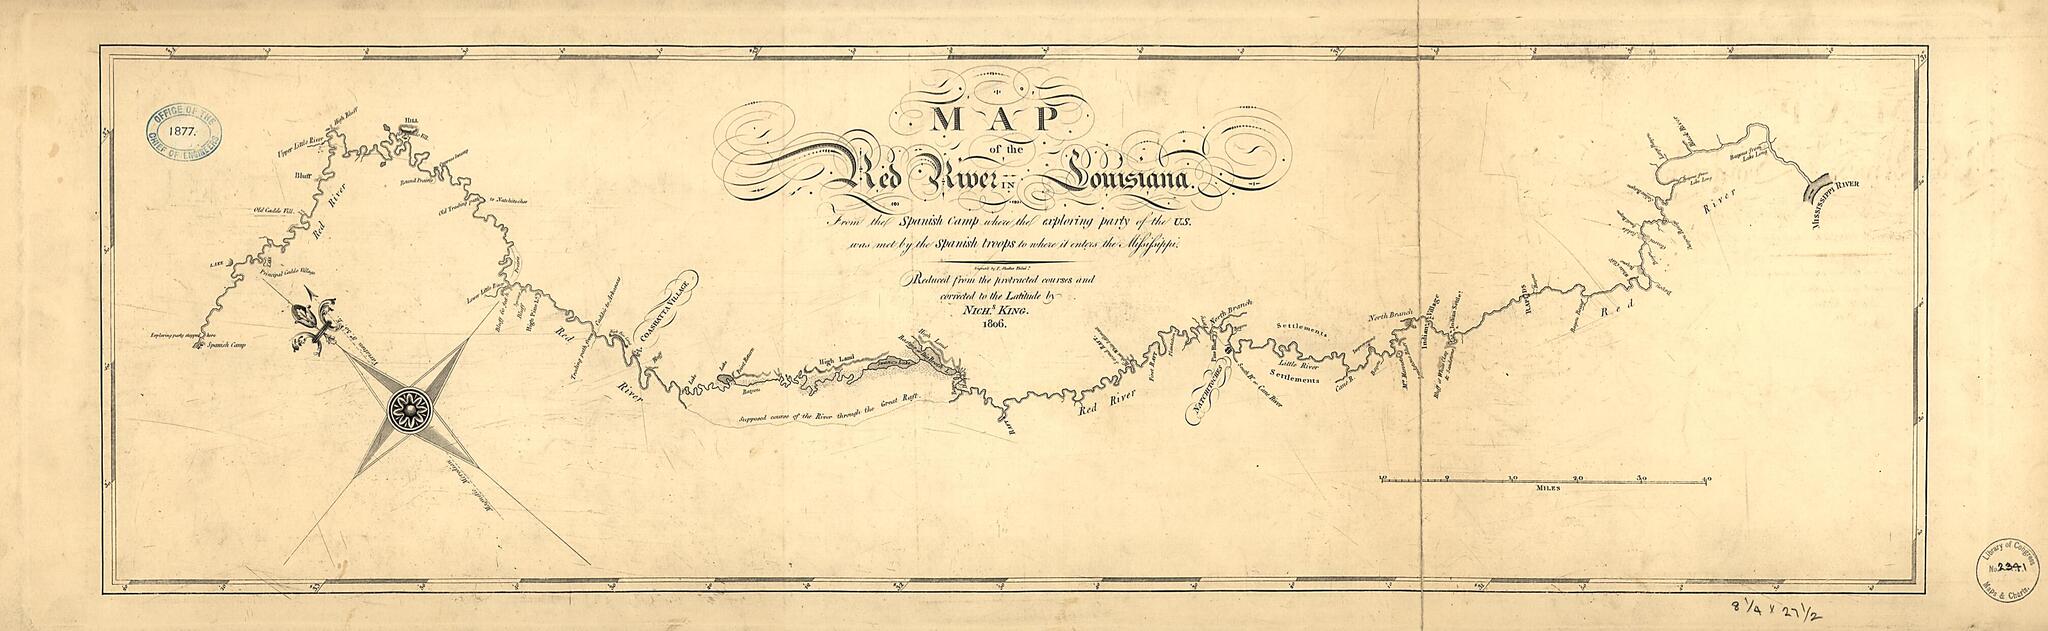 This old map of Map of the Red River In Louisiana from the Spanish Camp Where the Exploring Party of the U.S. Was Met by the Spanish Troops to Where It Enters the Mississippi, Reduced from the Protracted Courses and Corrected to the Latitude from 1806 wa